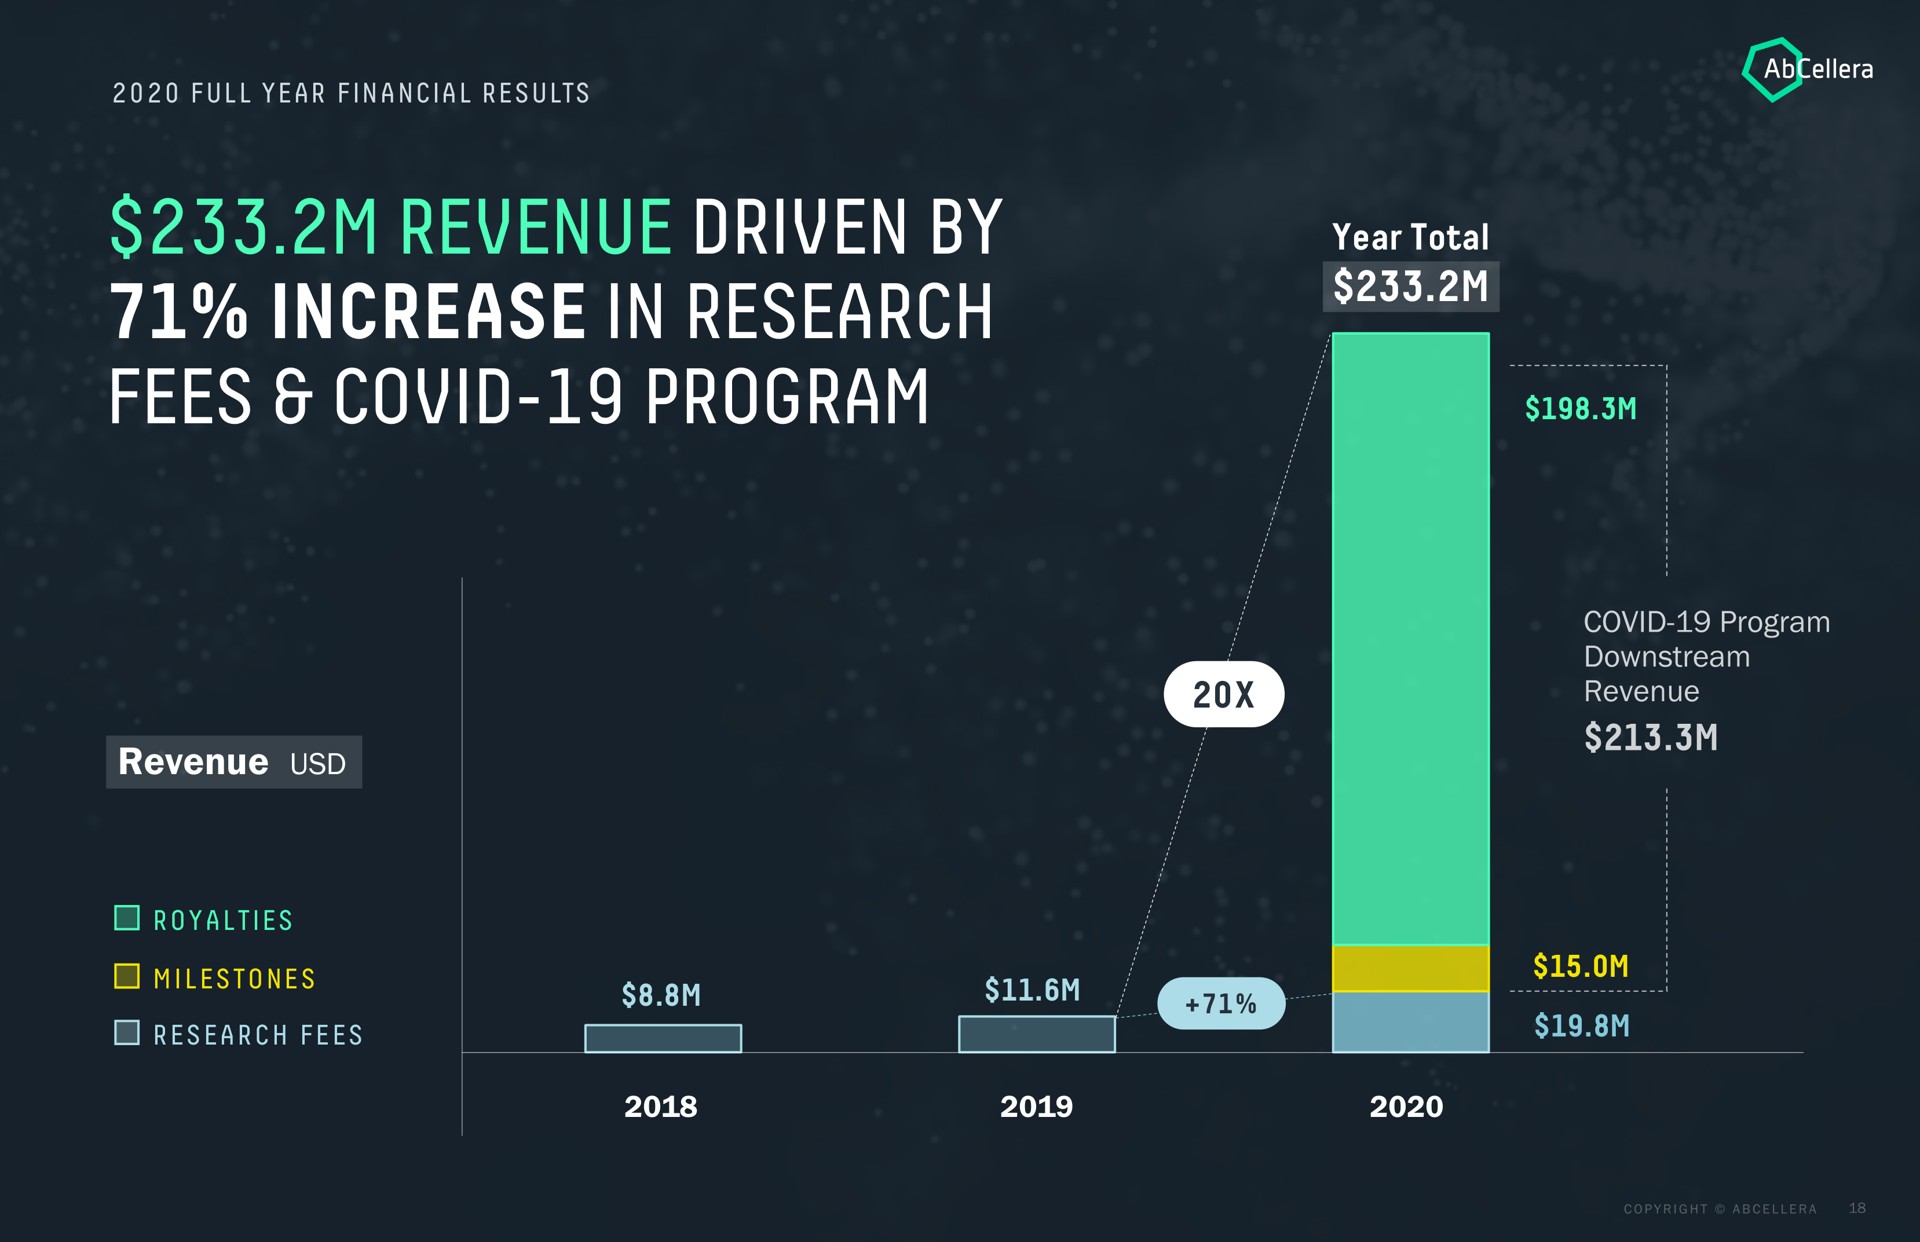 revenue driven by increase in research fees covid program a see | AbCellera